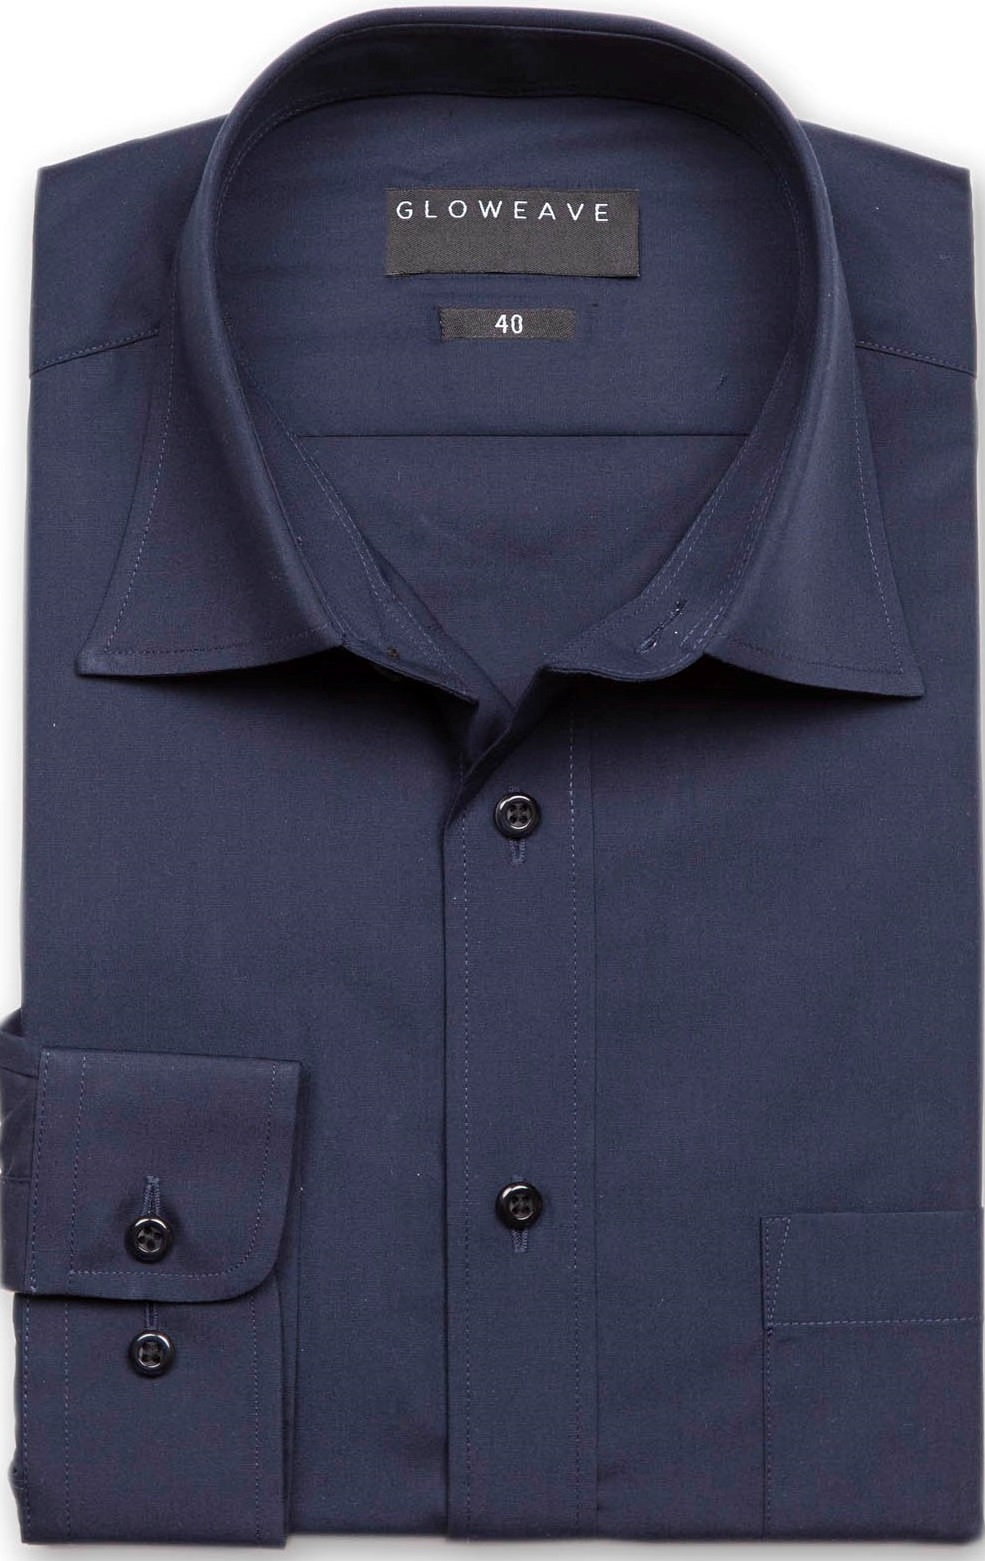 Mens Business Shirts Online Gloweave Shirts Mens Save up to 25%